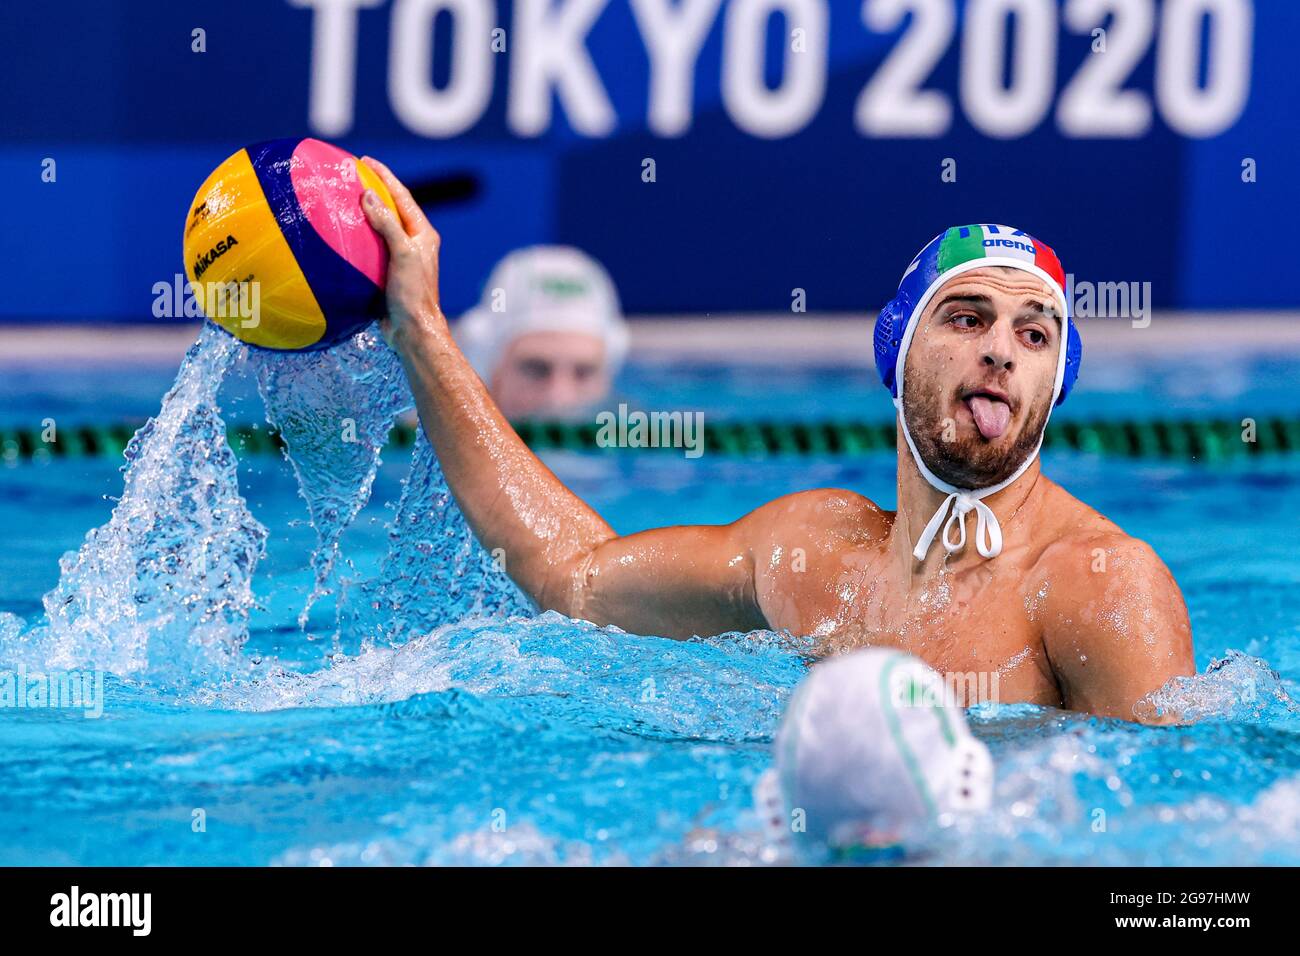 TOKYO, JAPAN - JULY 25: Vincenzo Dolce of Italy during the Tokyo 2020  Olympic Waterpolo Tournament Men match between Team South Africa and Team  Italy at Tatsumi Waterpolo Centre on July 25,